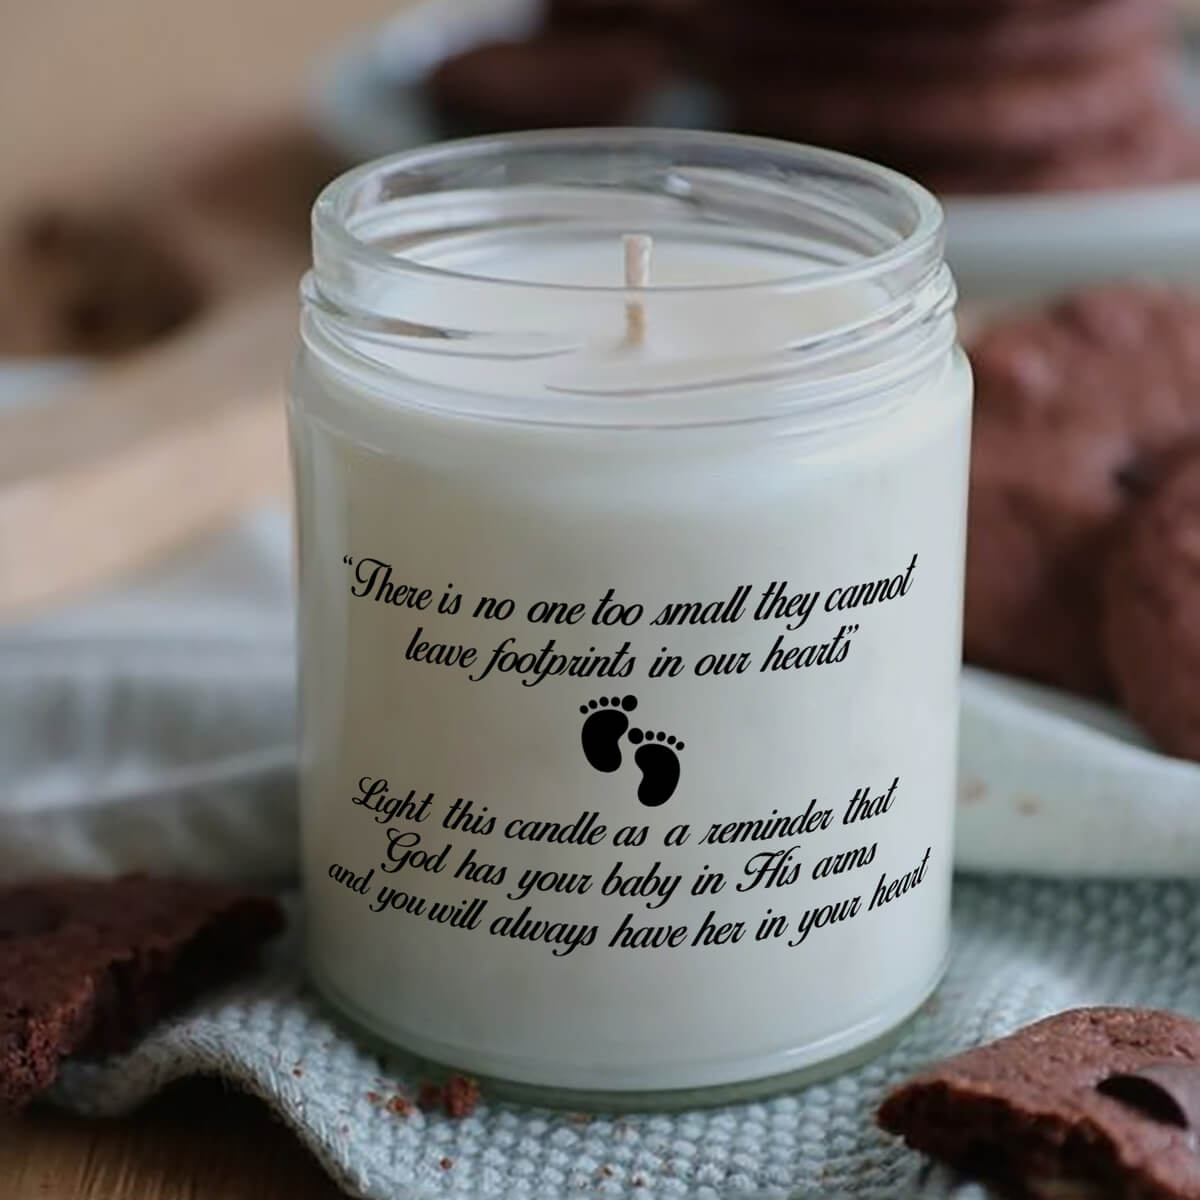 Shop Scented Candle, designed to leave a lighter footprint